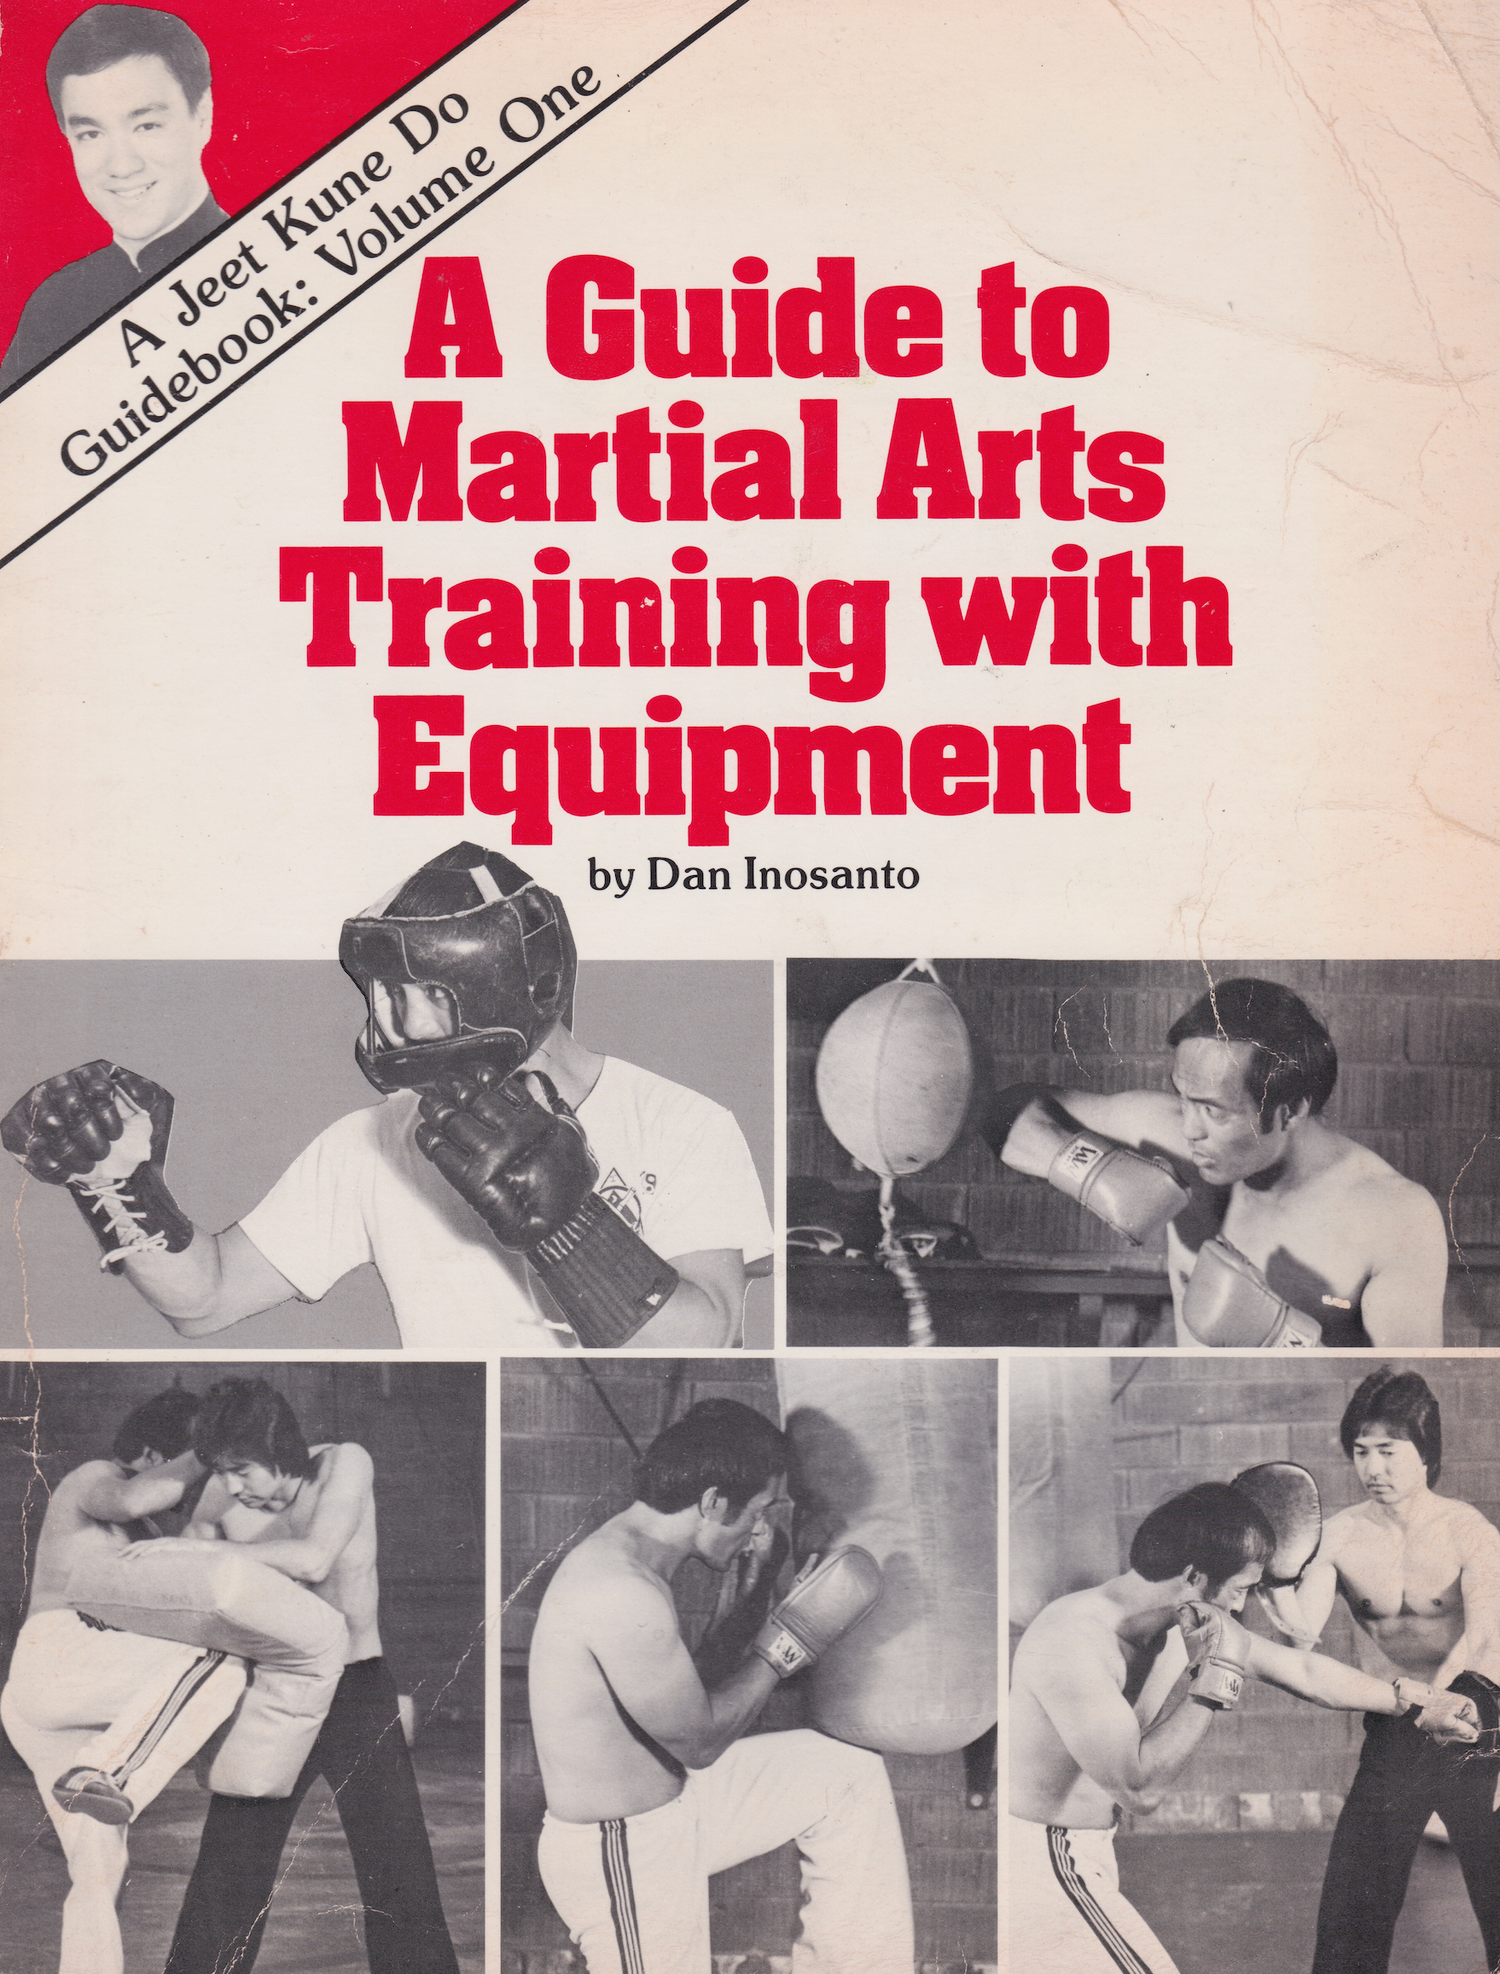 Jeet Kune Do Guidebook 1: A Guide to Martial Arts Training With Equipment Book by Dan Inosanto (Preowned)